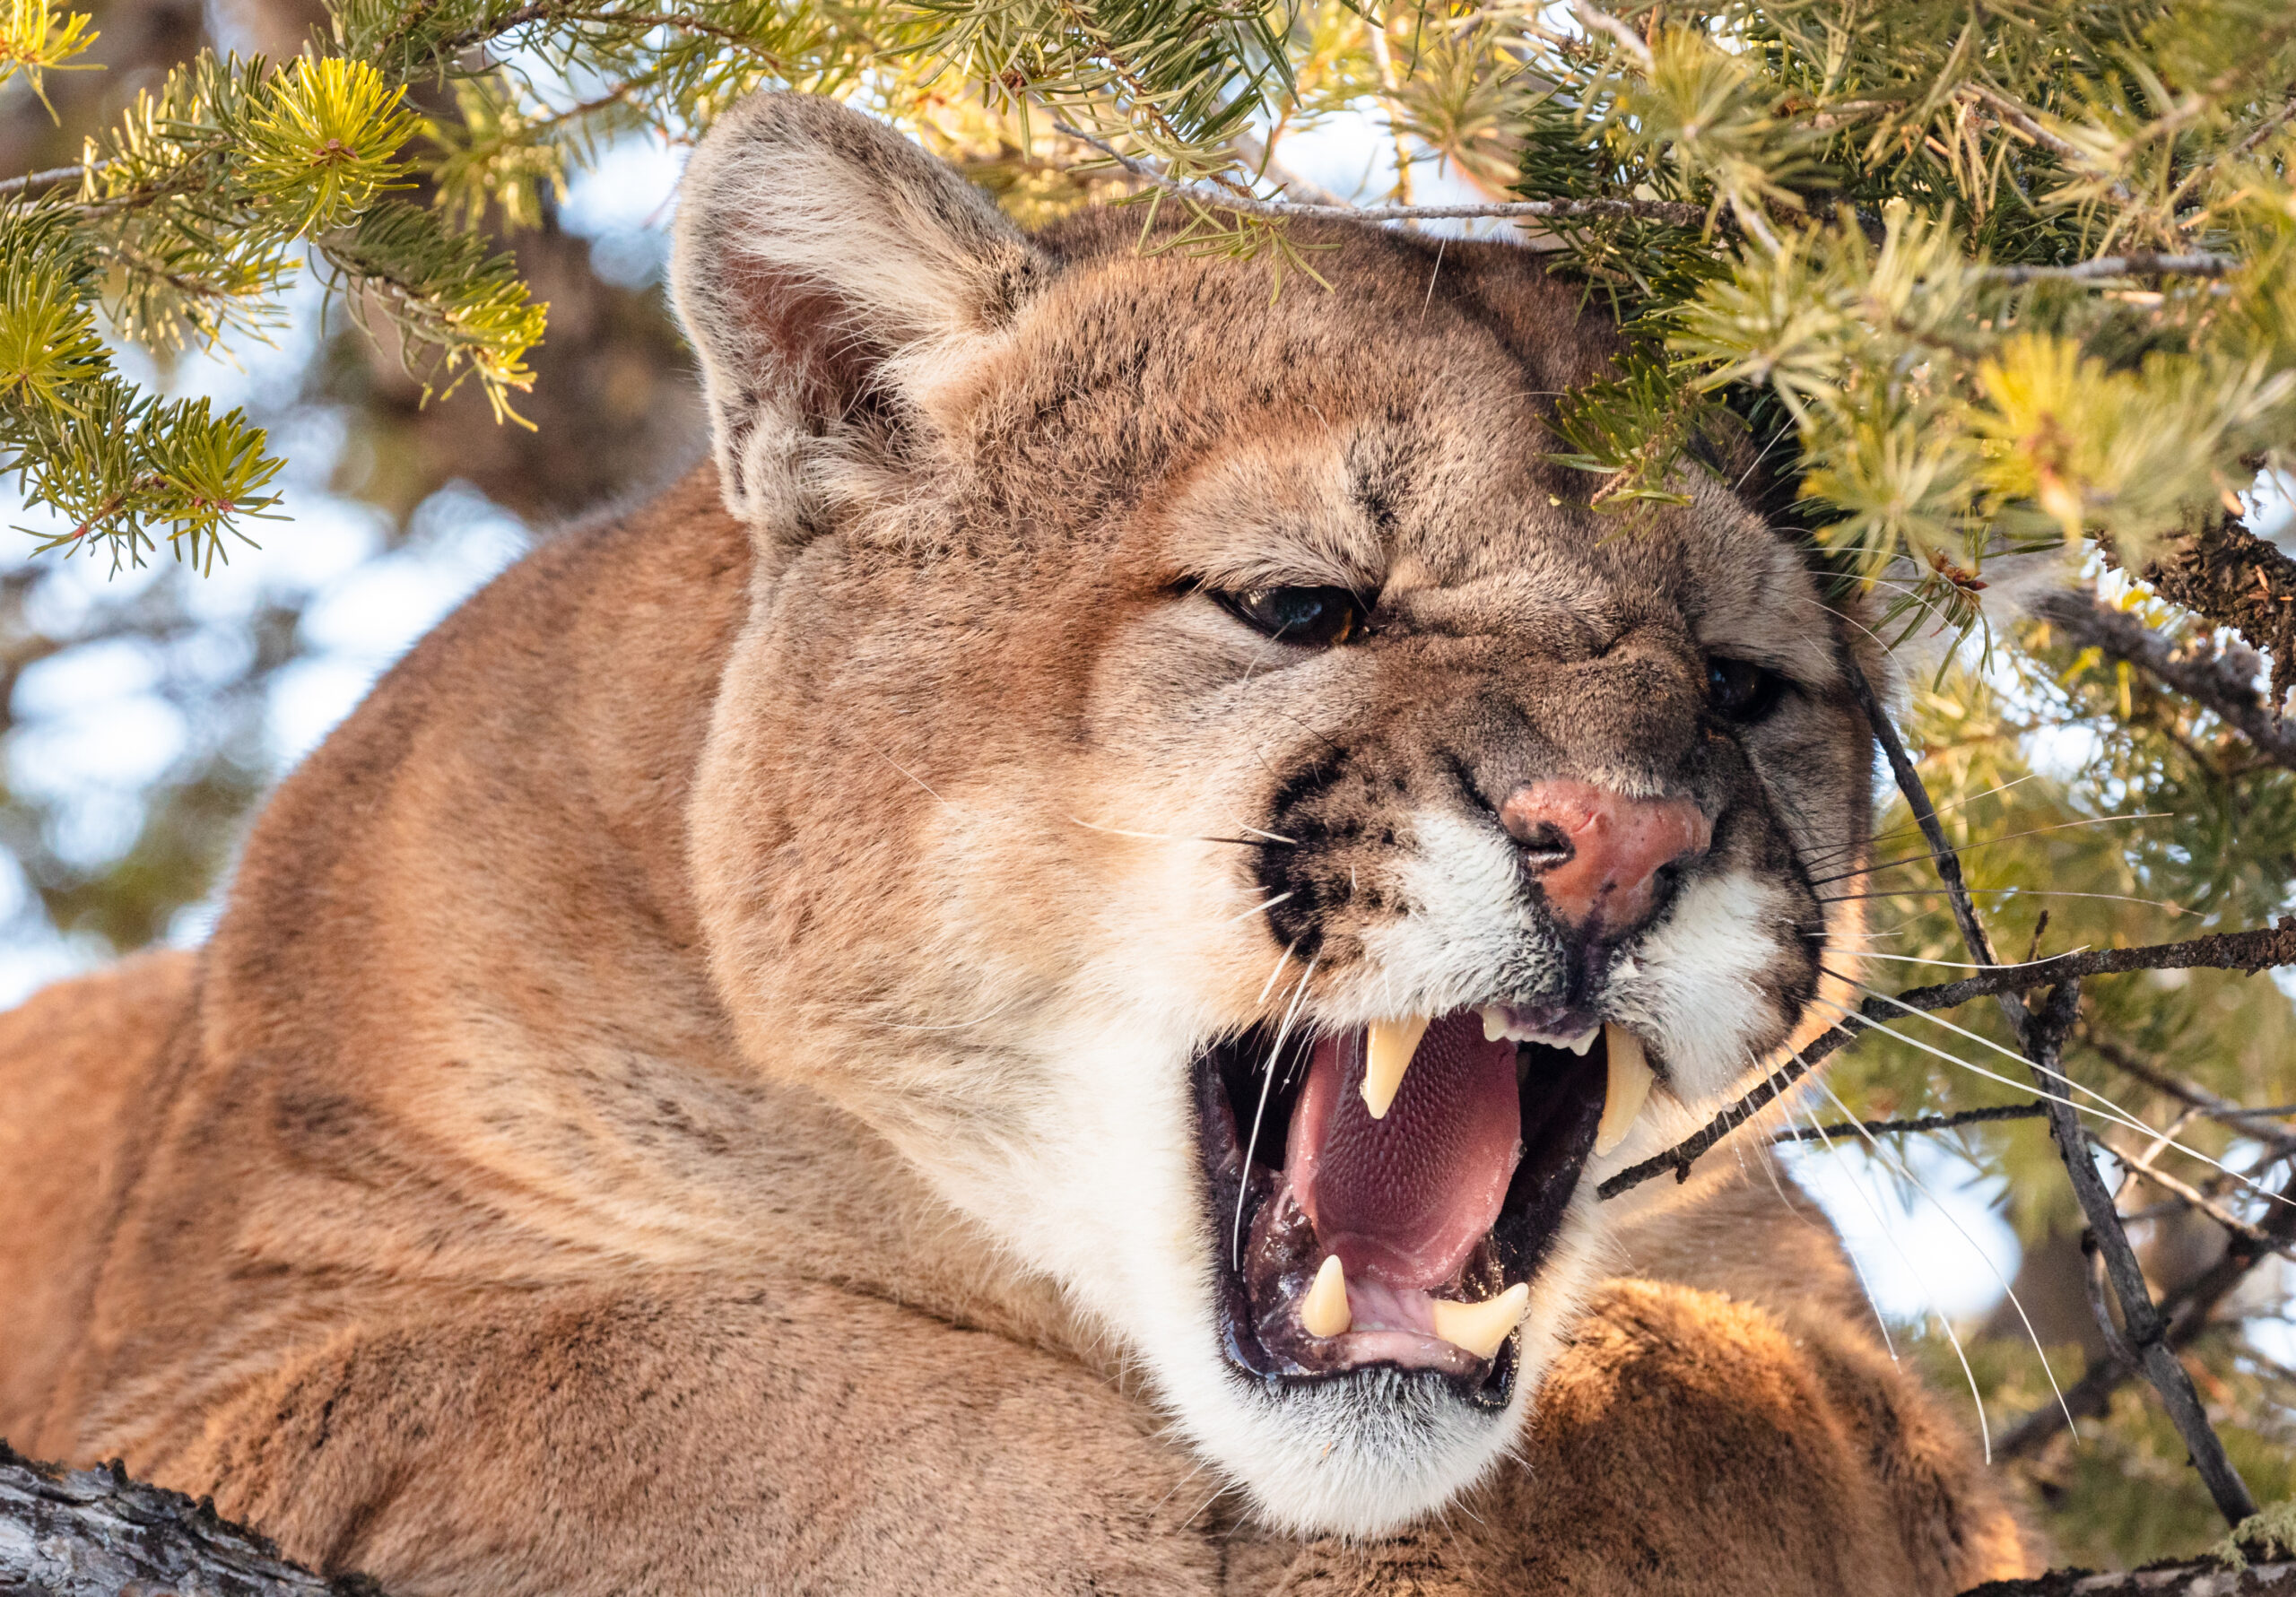 Canadian Plumber Kicks a Cougar in the Head to Save His Daughter's Dog